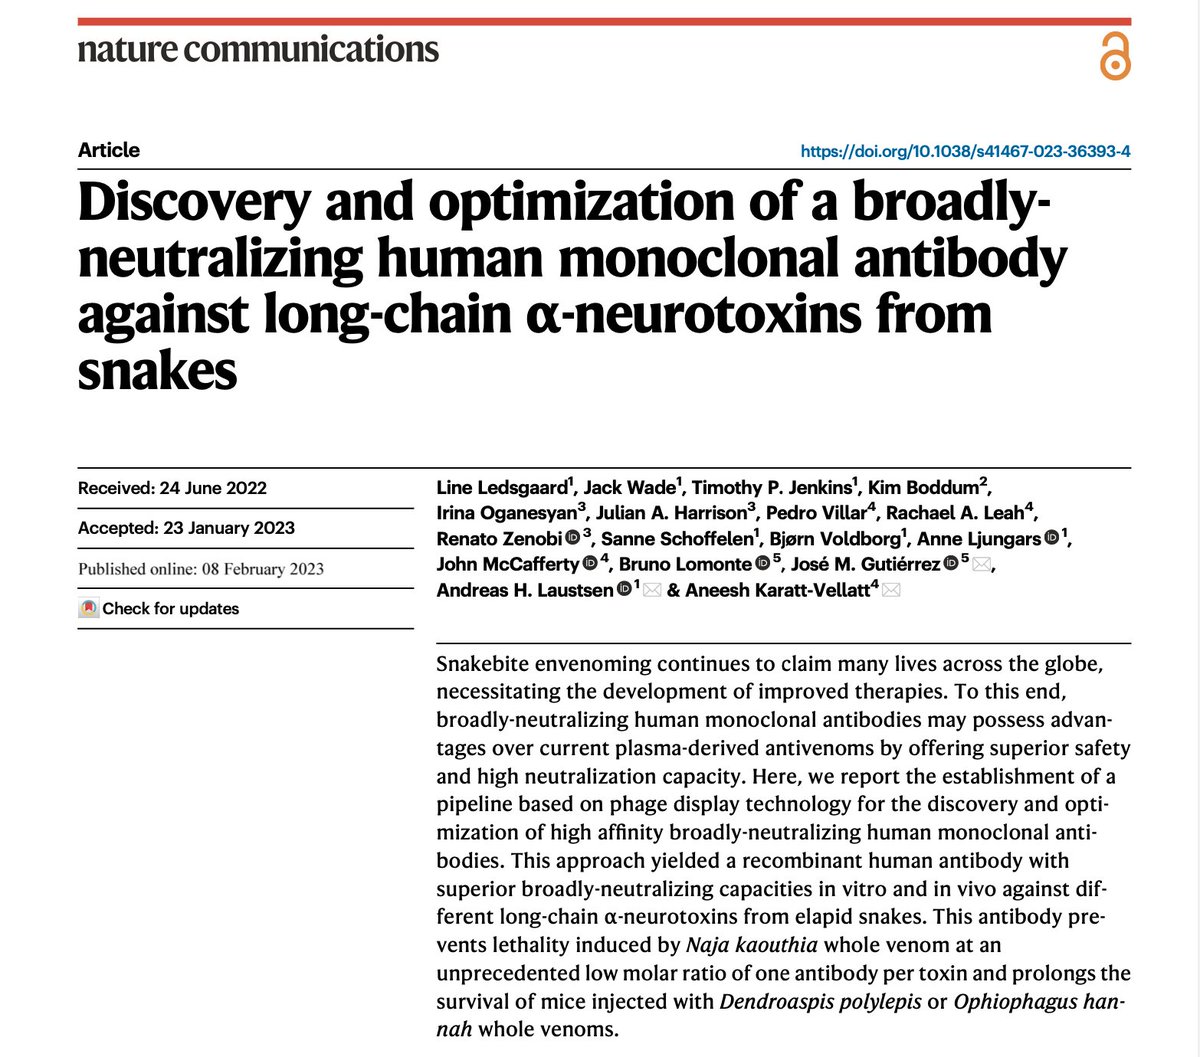 Pleased to announce this article in @NatureComms on the #Discovery of a human #antibody that broadly neutralises #neurotoxins from #snakes: nature.com/articles/s4146… Collaboration between @TropicalPharLab , @IontasLtd, @Ciencia_UCR, @sophionbio & @ETH_en.